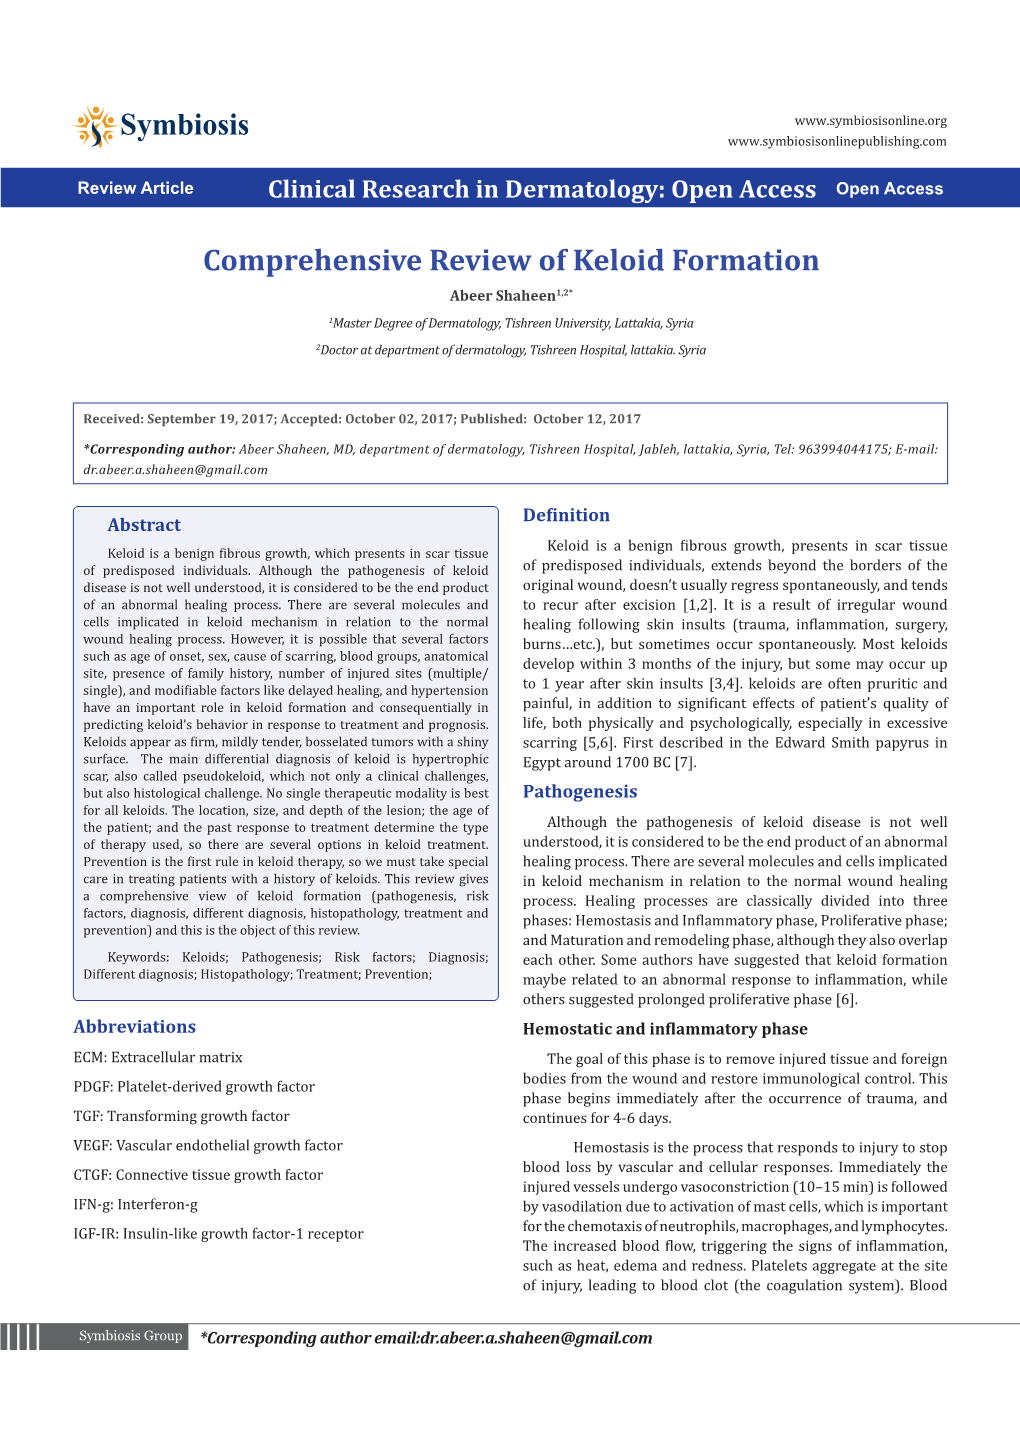 Comprehensive Review of Keloid Formation